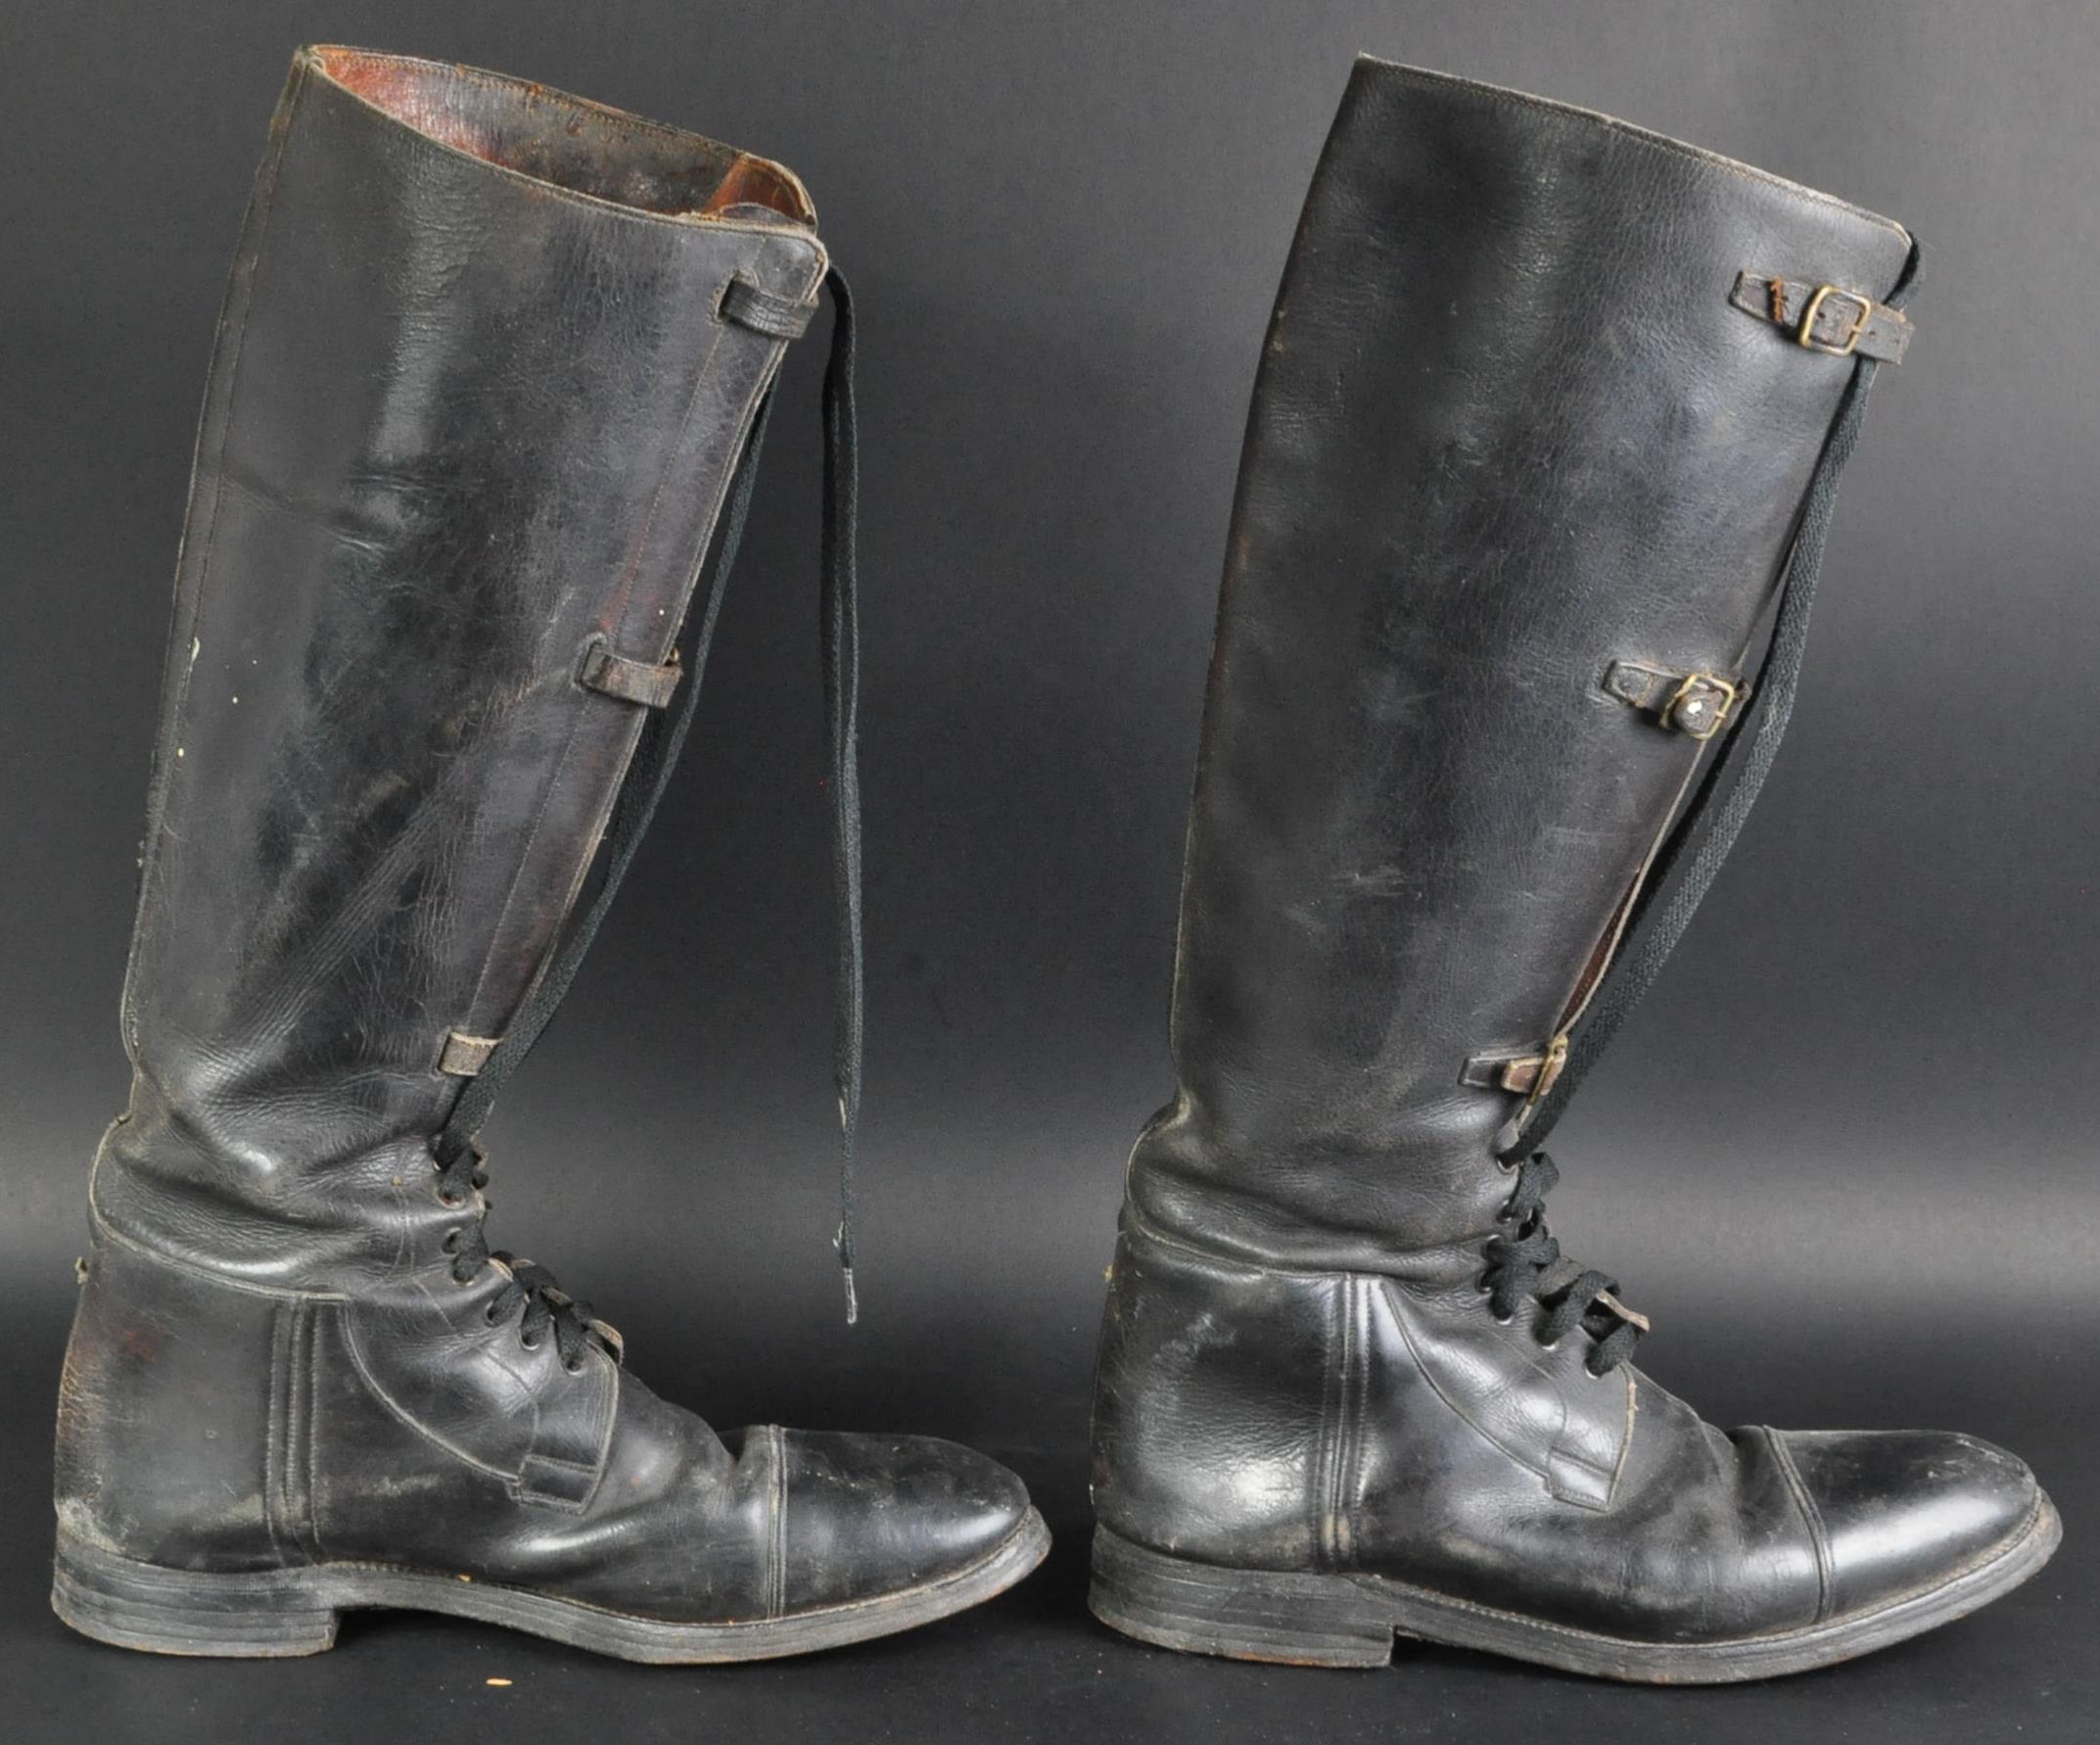 WWI FIRST WORLD WAR INTEREST - ROYAL FLYING CORPS BOOTS - Image 6 of 6